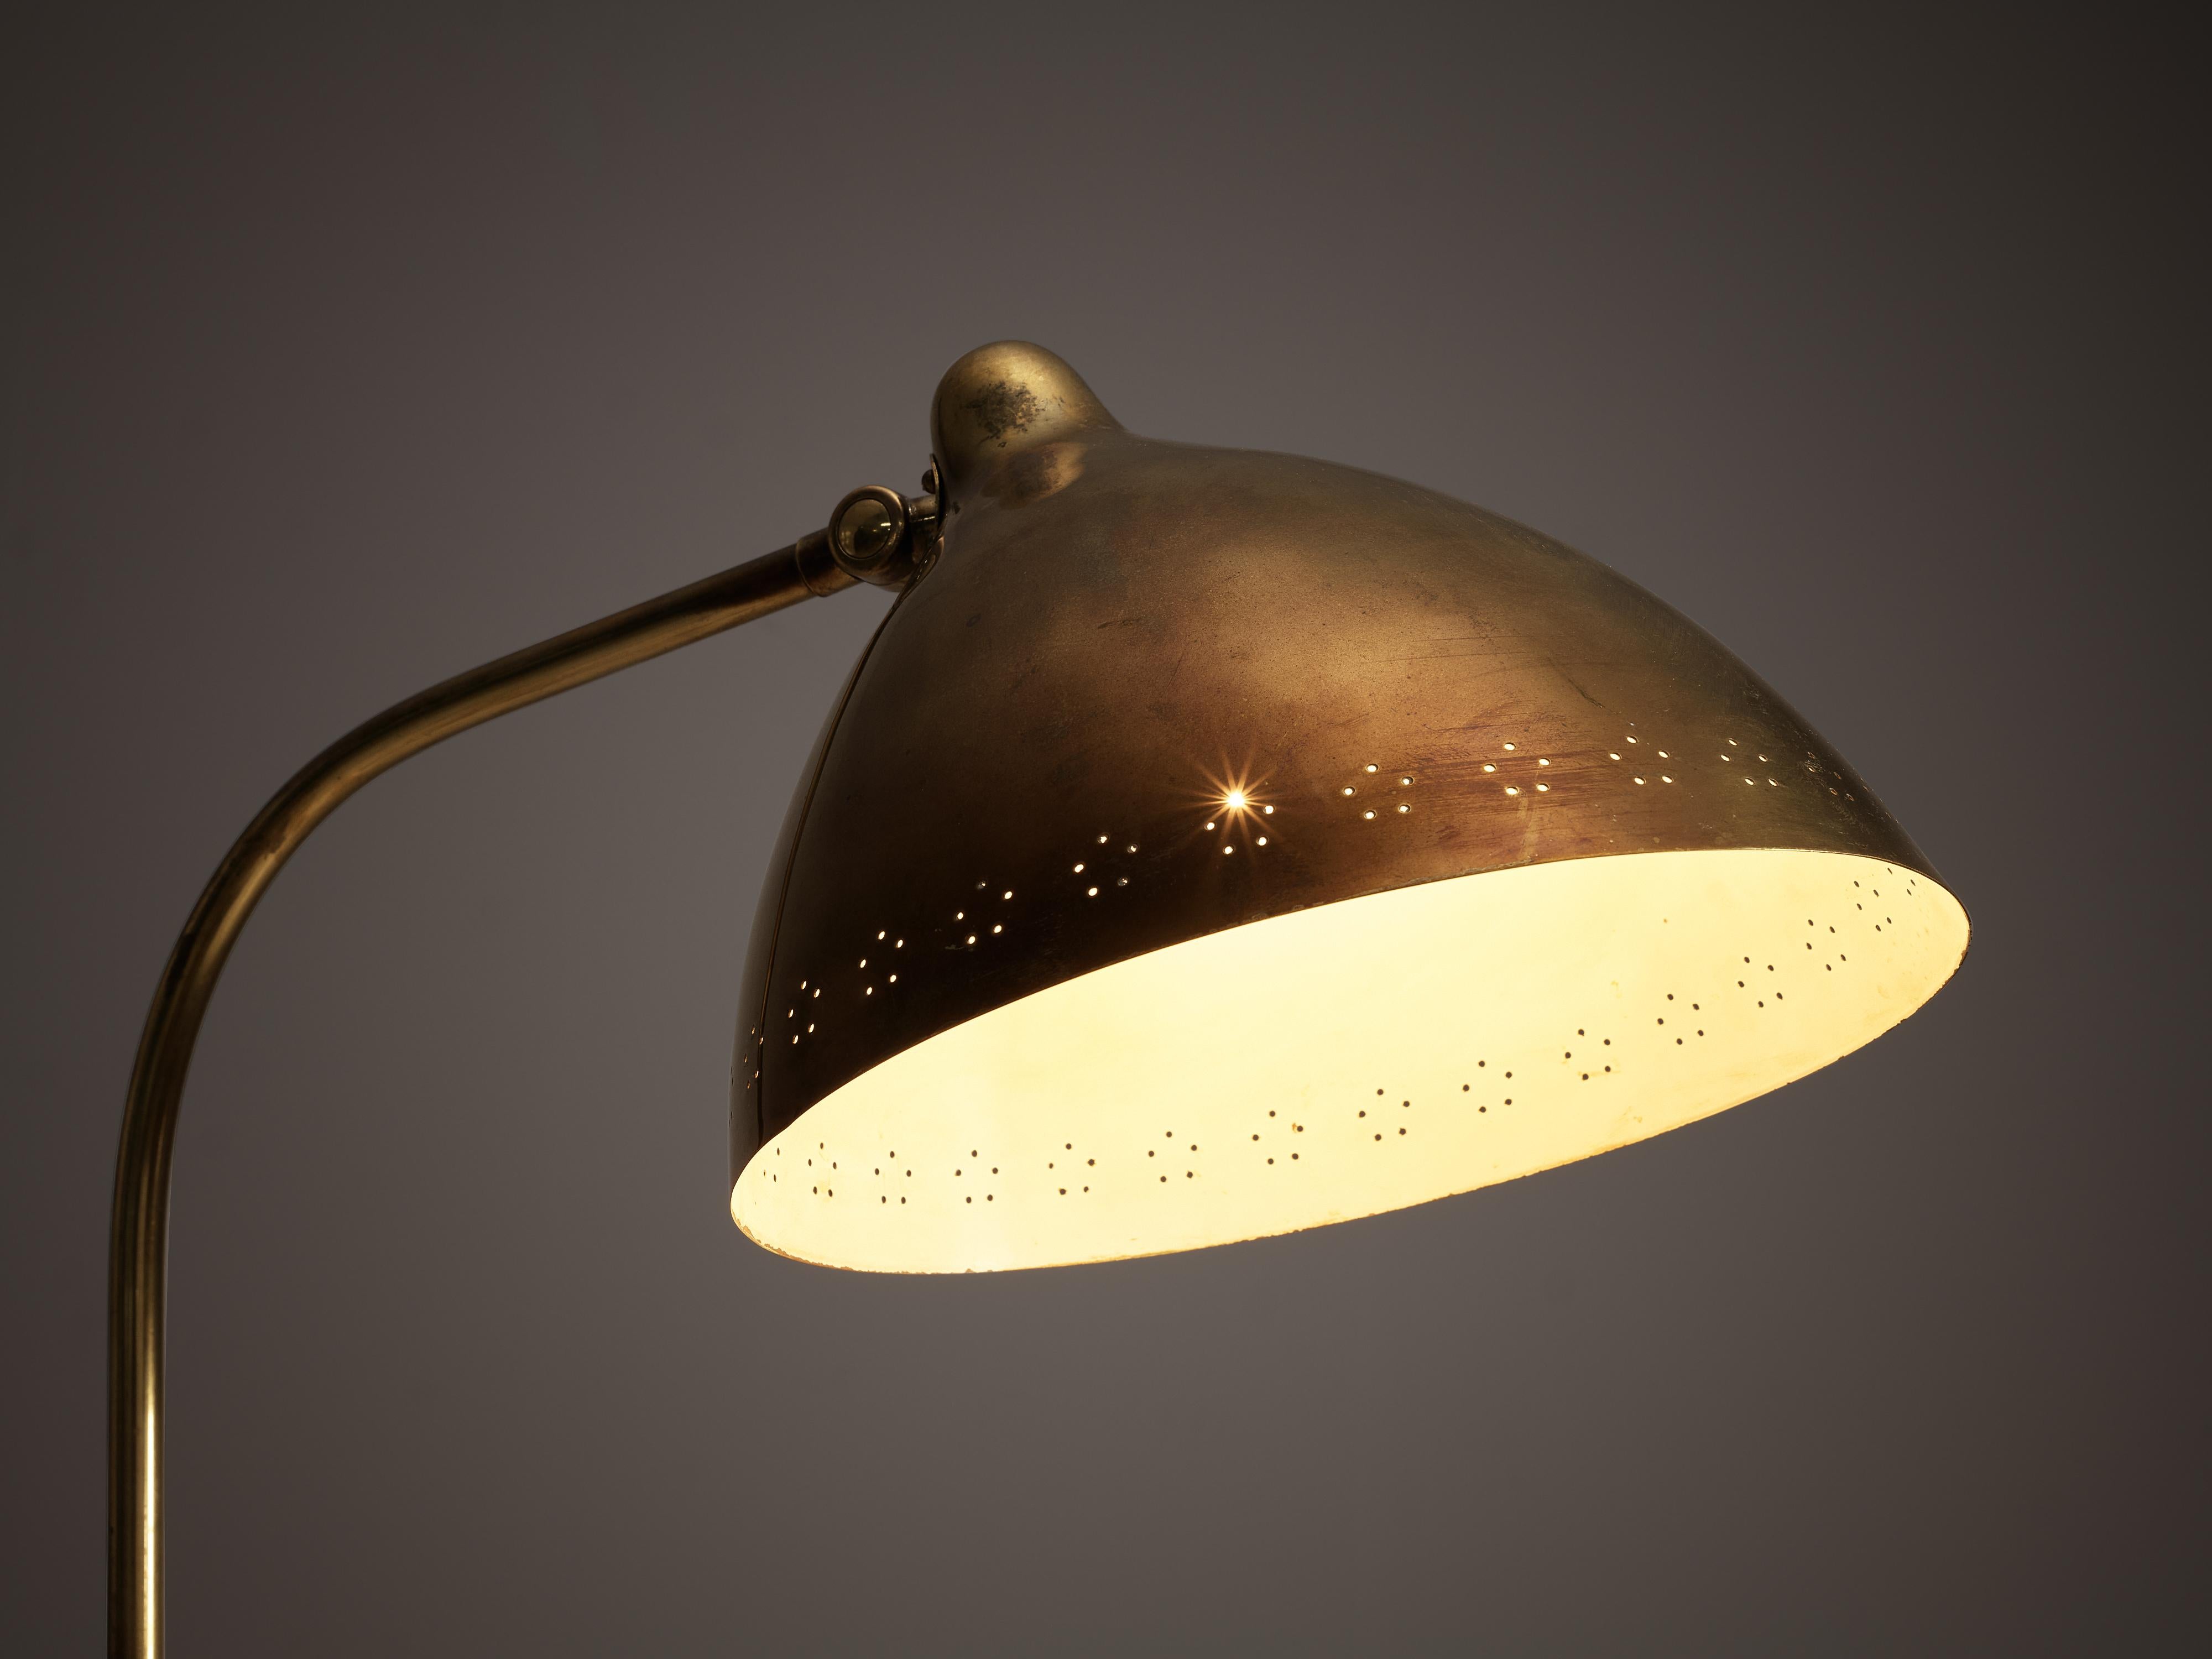 Mid-20th Century Lisa Johansson-Pape for Orno Floor Lamp in Brass and Leather